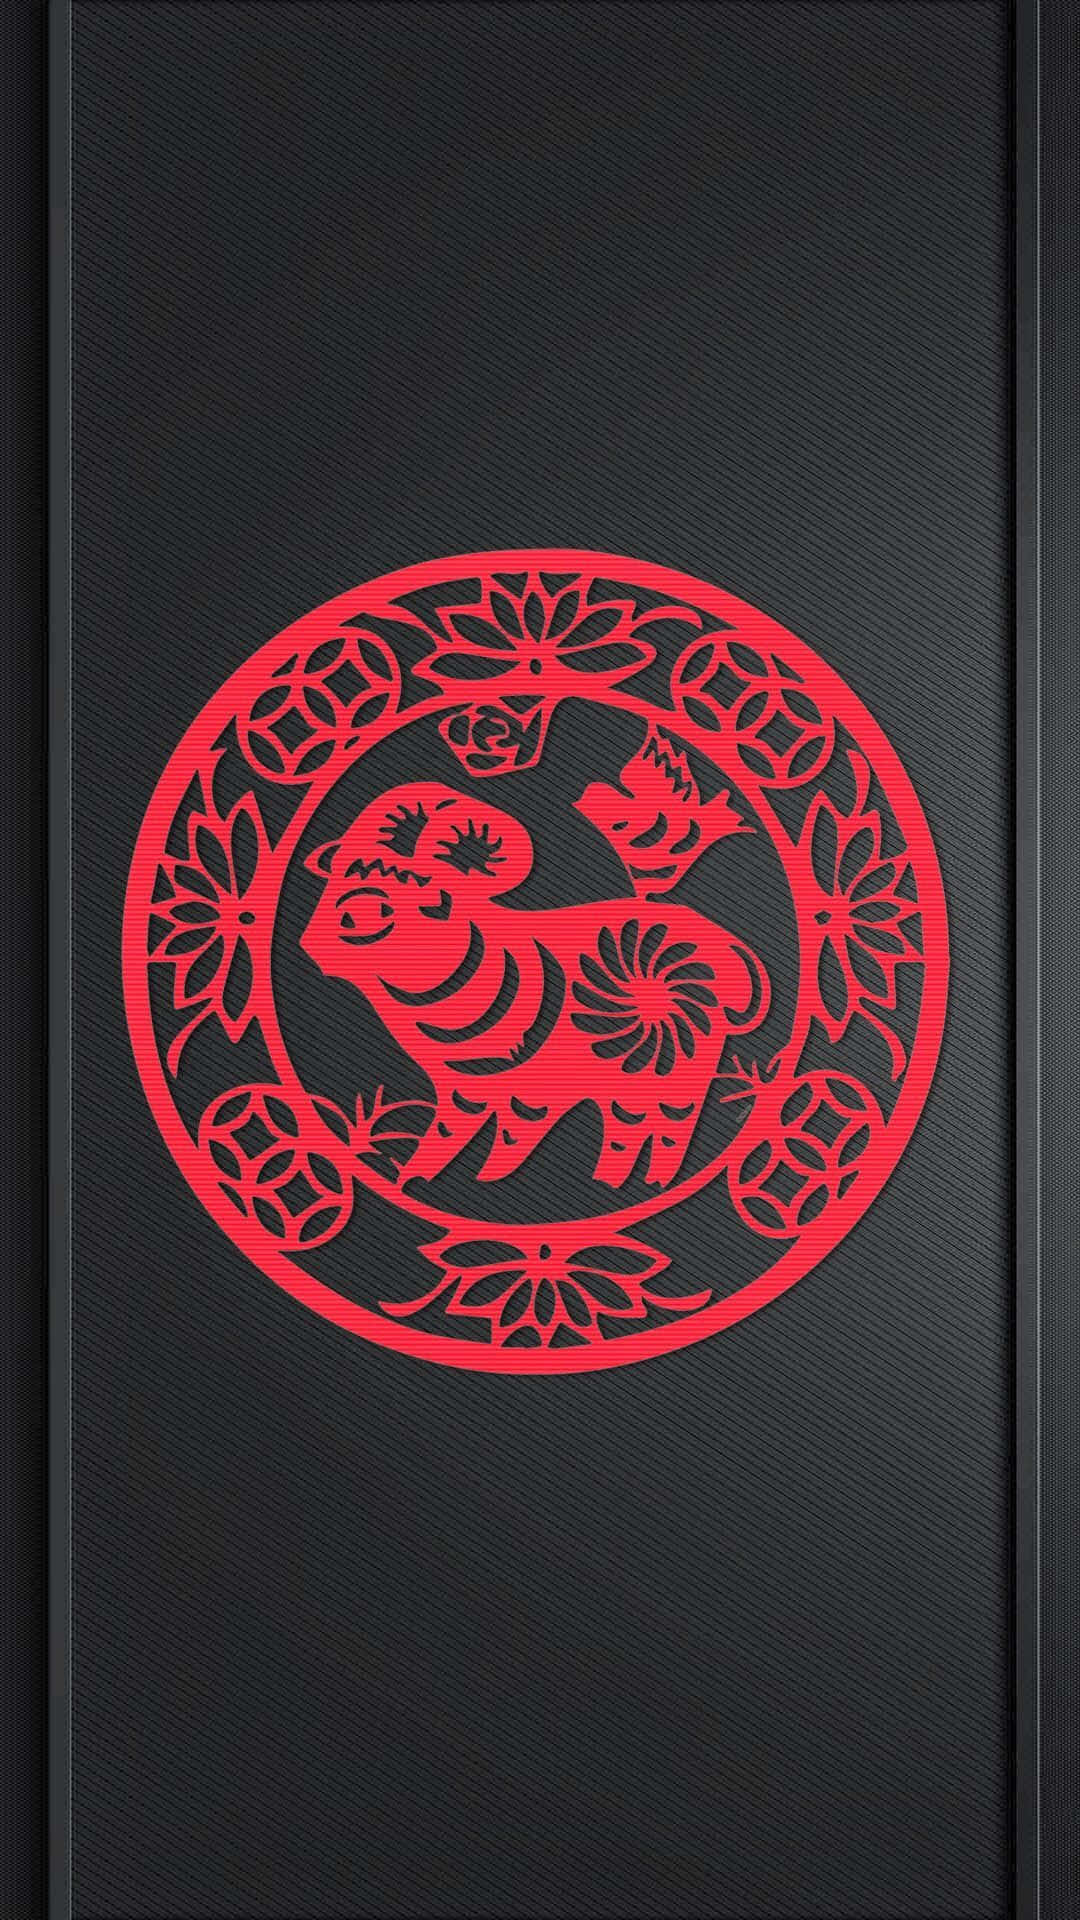 Celebrating Chinese New Year with an Iphone Wallpaper